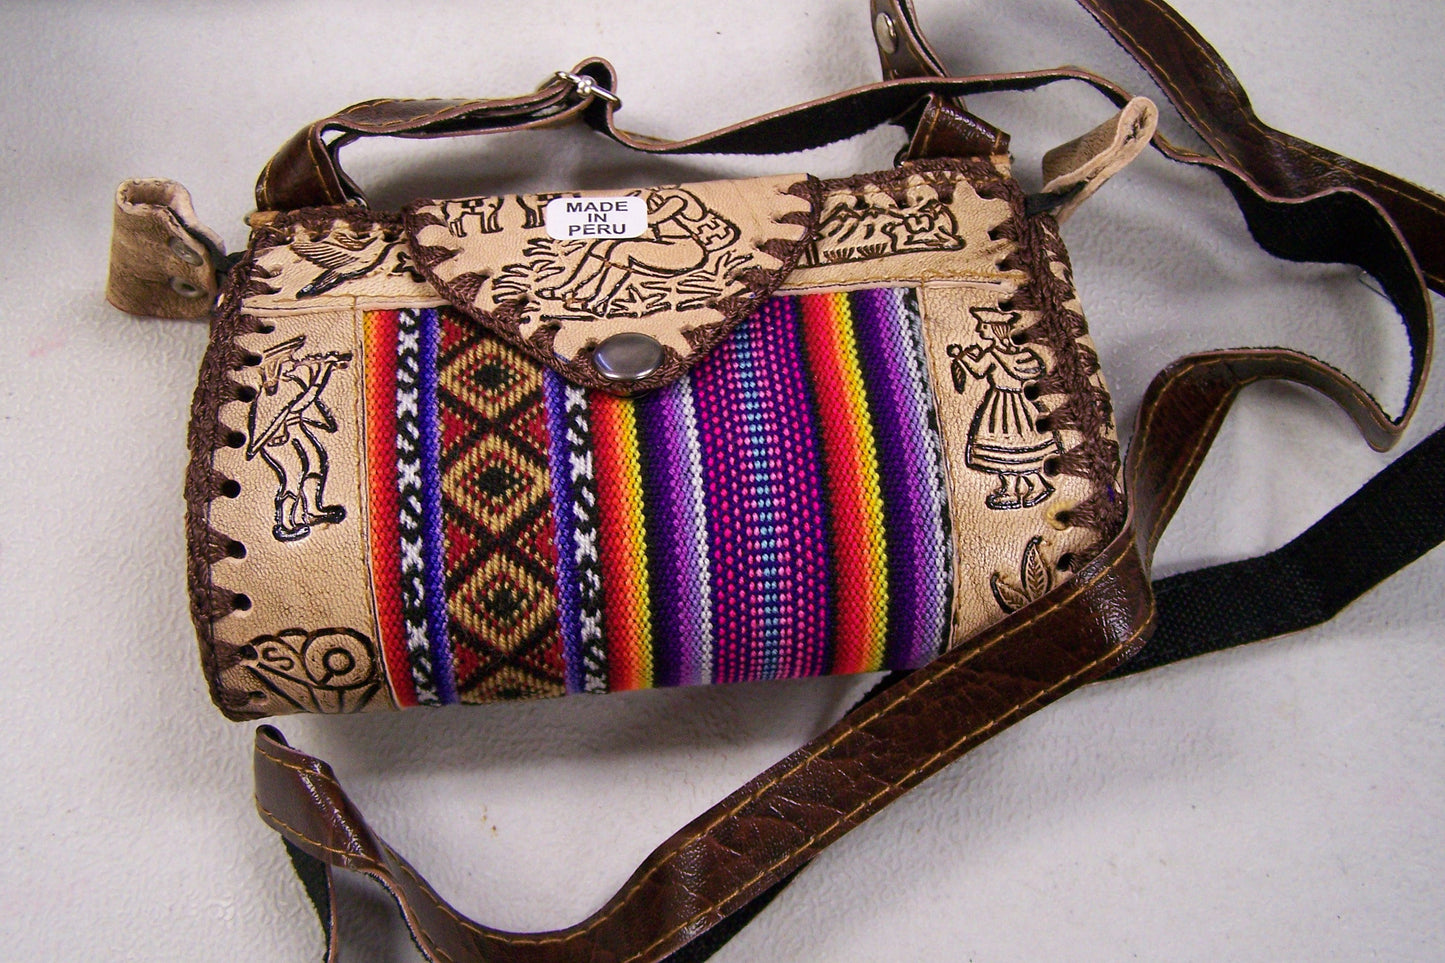 Etched Leather and Cloth "Chica Purse" Shoulder Bag - Peru